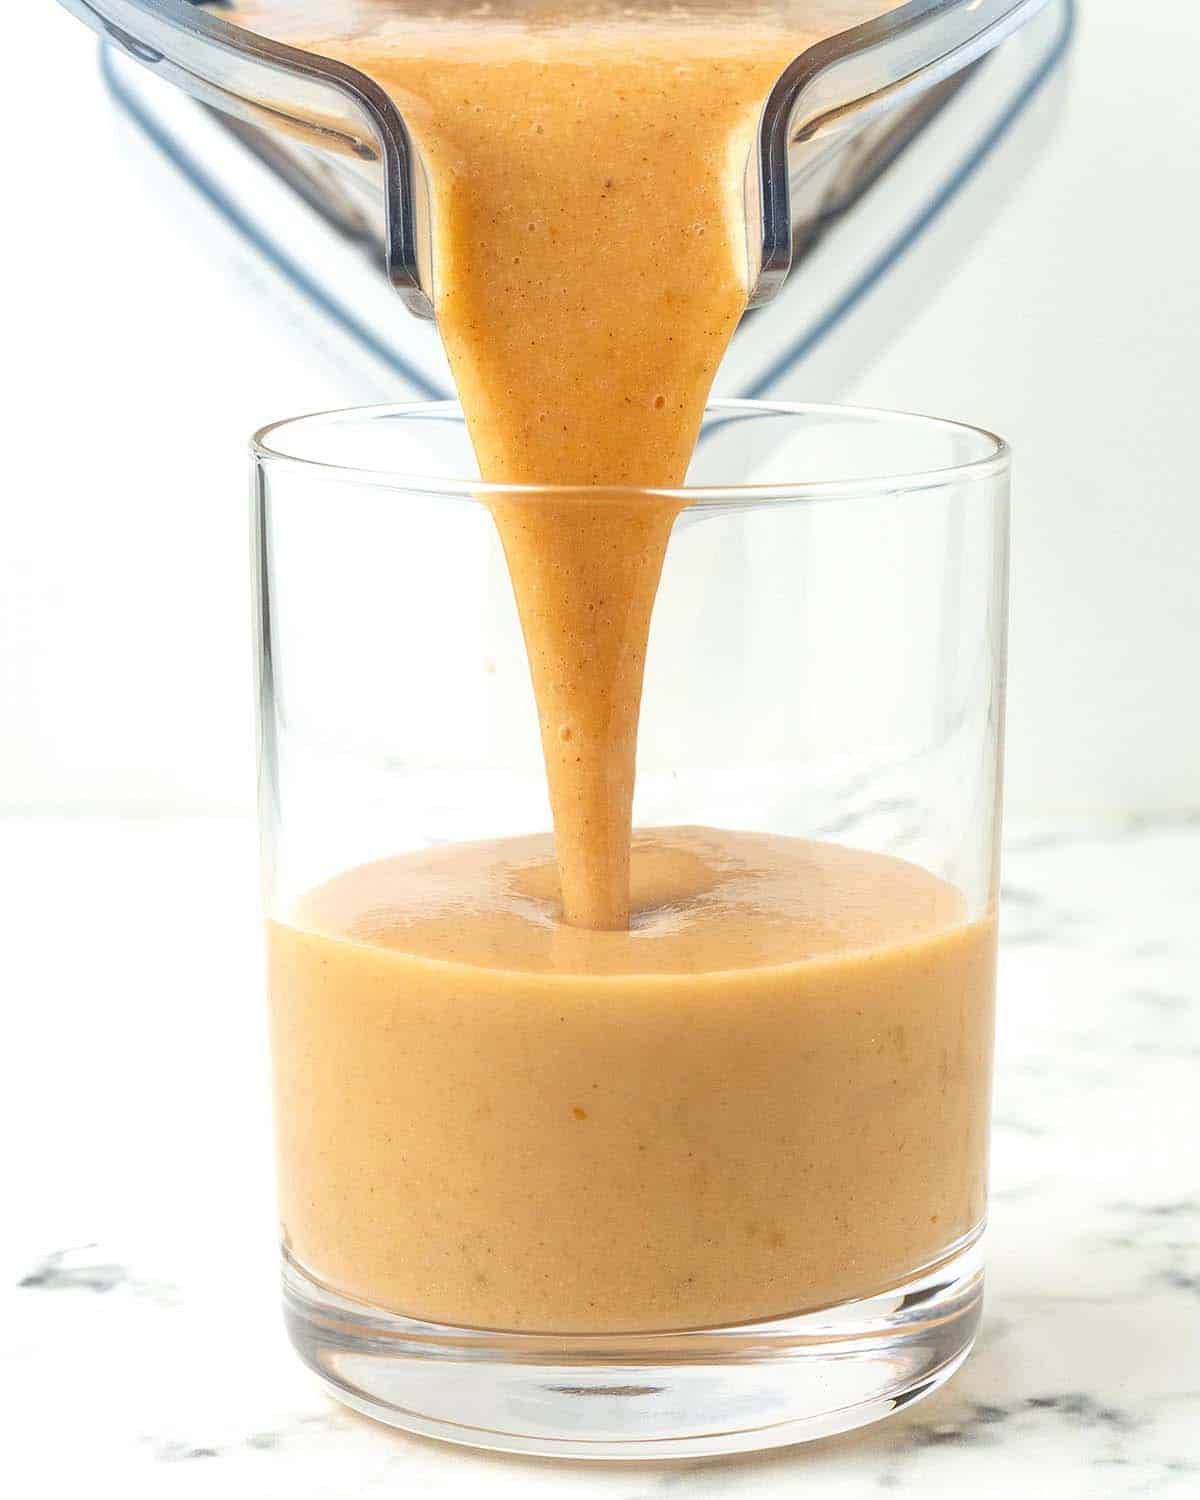 A freshly blended pumpkin spice smoothie bring poured into a glass.